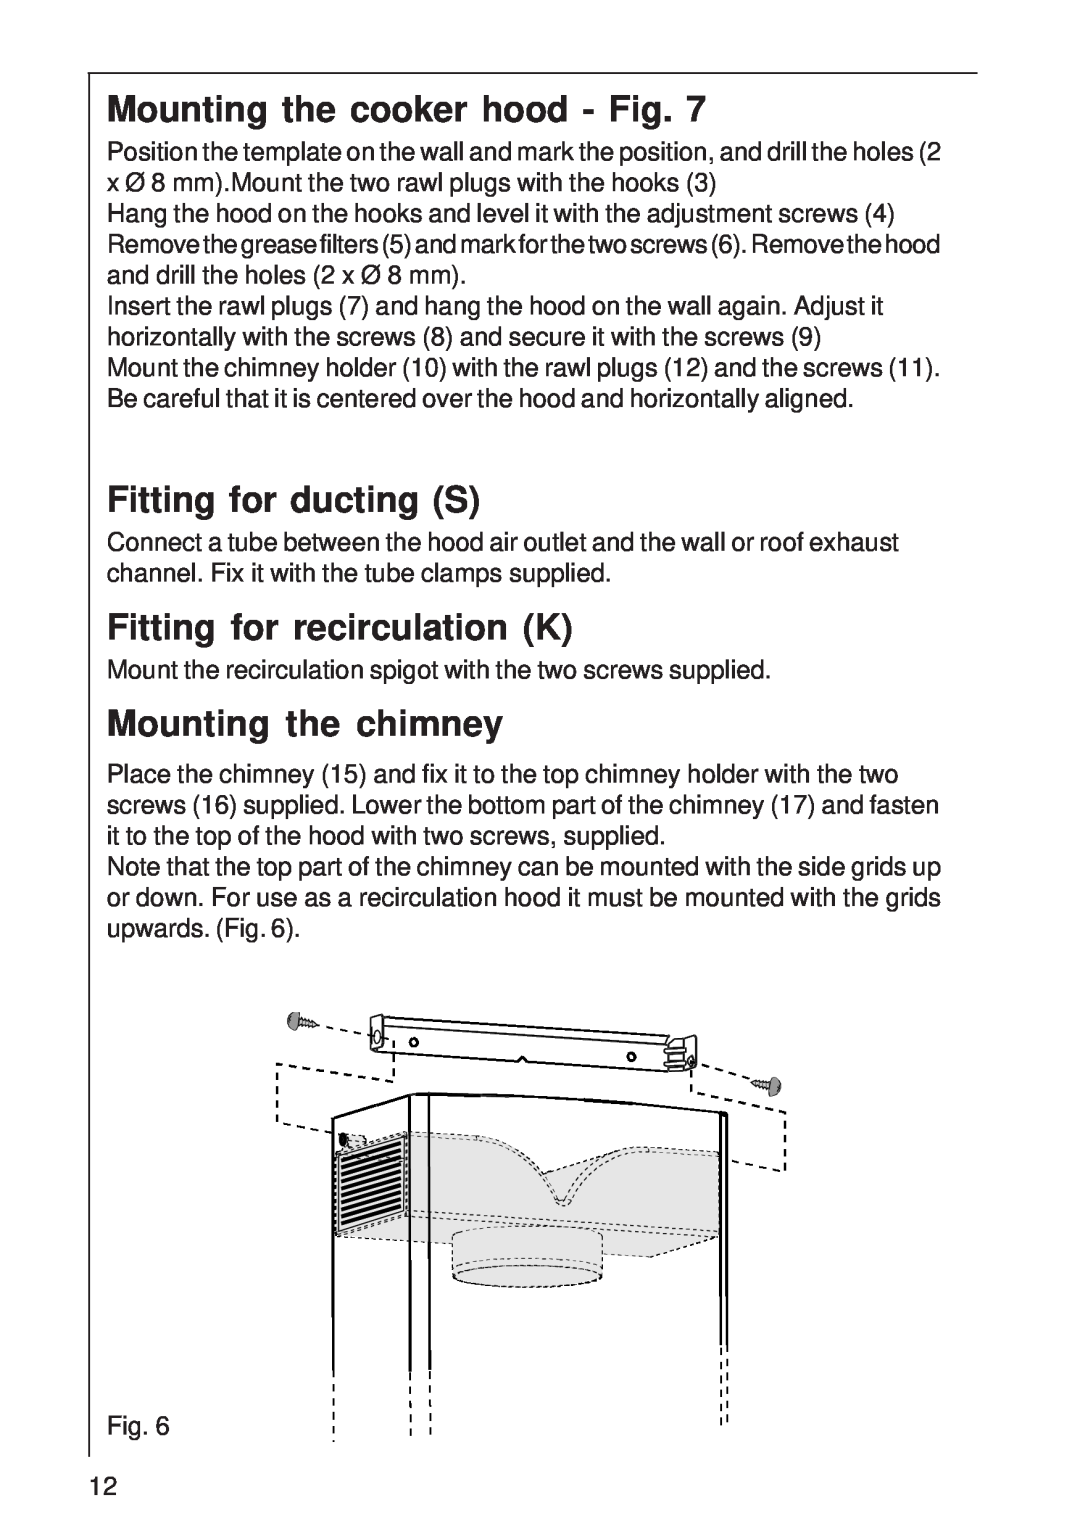 AEG 8160 D Mounting the cooker hood - Fig, Fitting for ducting S, Fitting for recirculation K, Mounting the chimney 